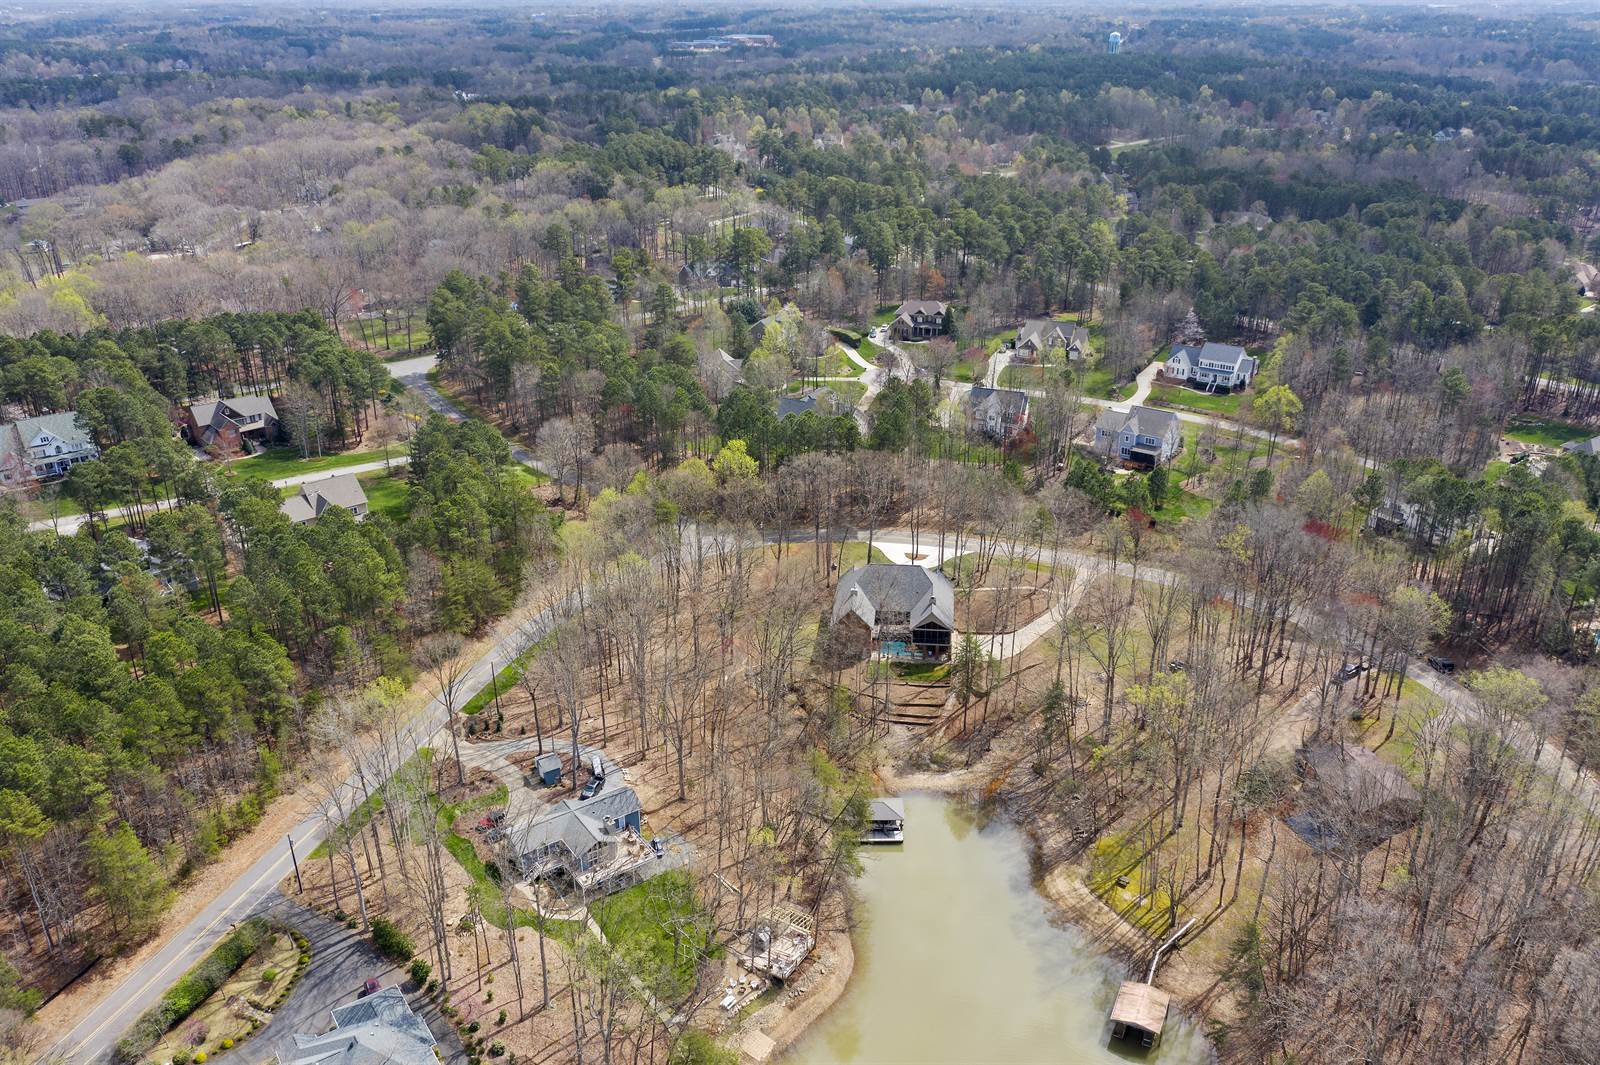 534 Lakeview Shores Loop, Mooresville, NC 28117